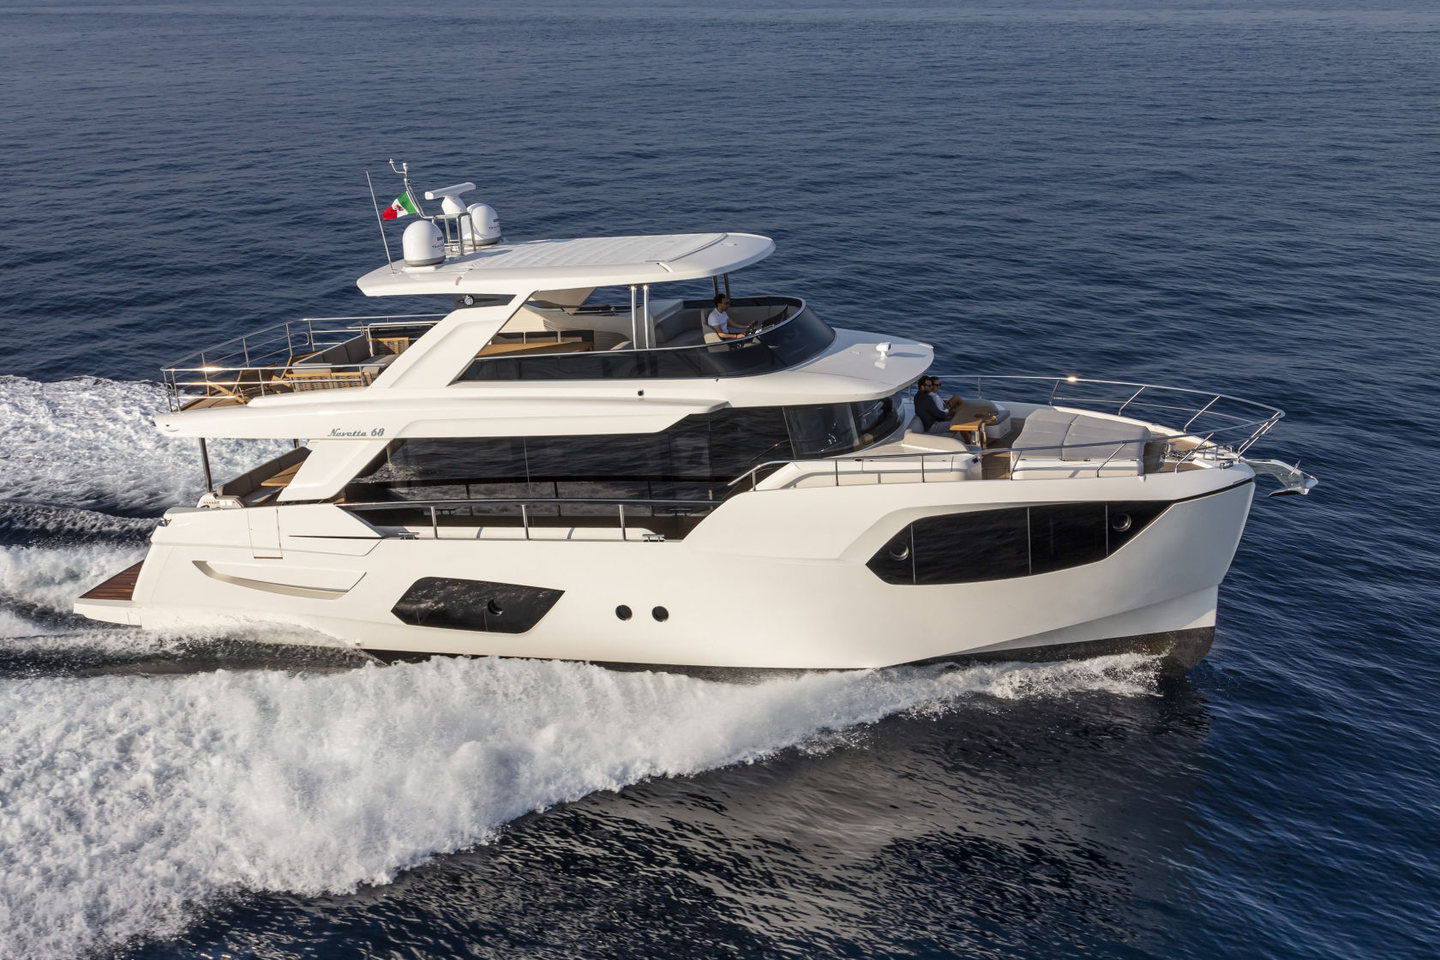 360 VR Virtual Tours of the Absolute Navetta 68